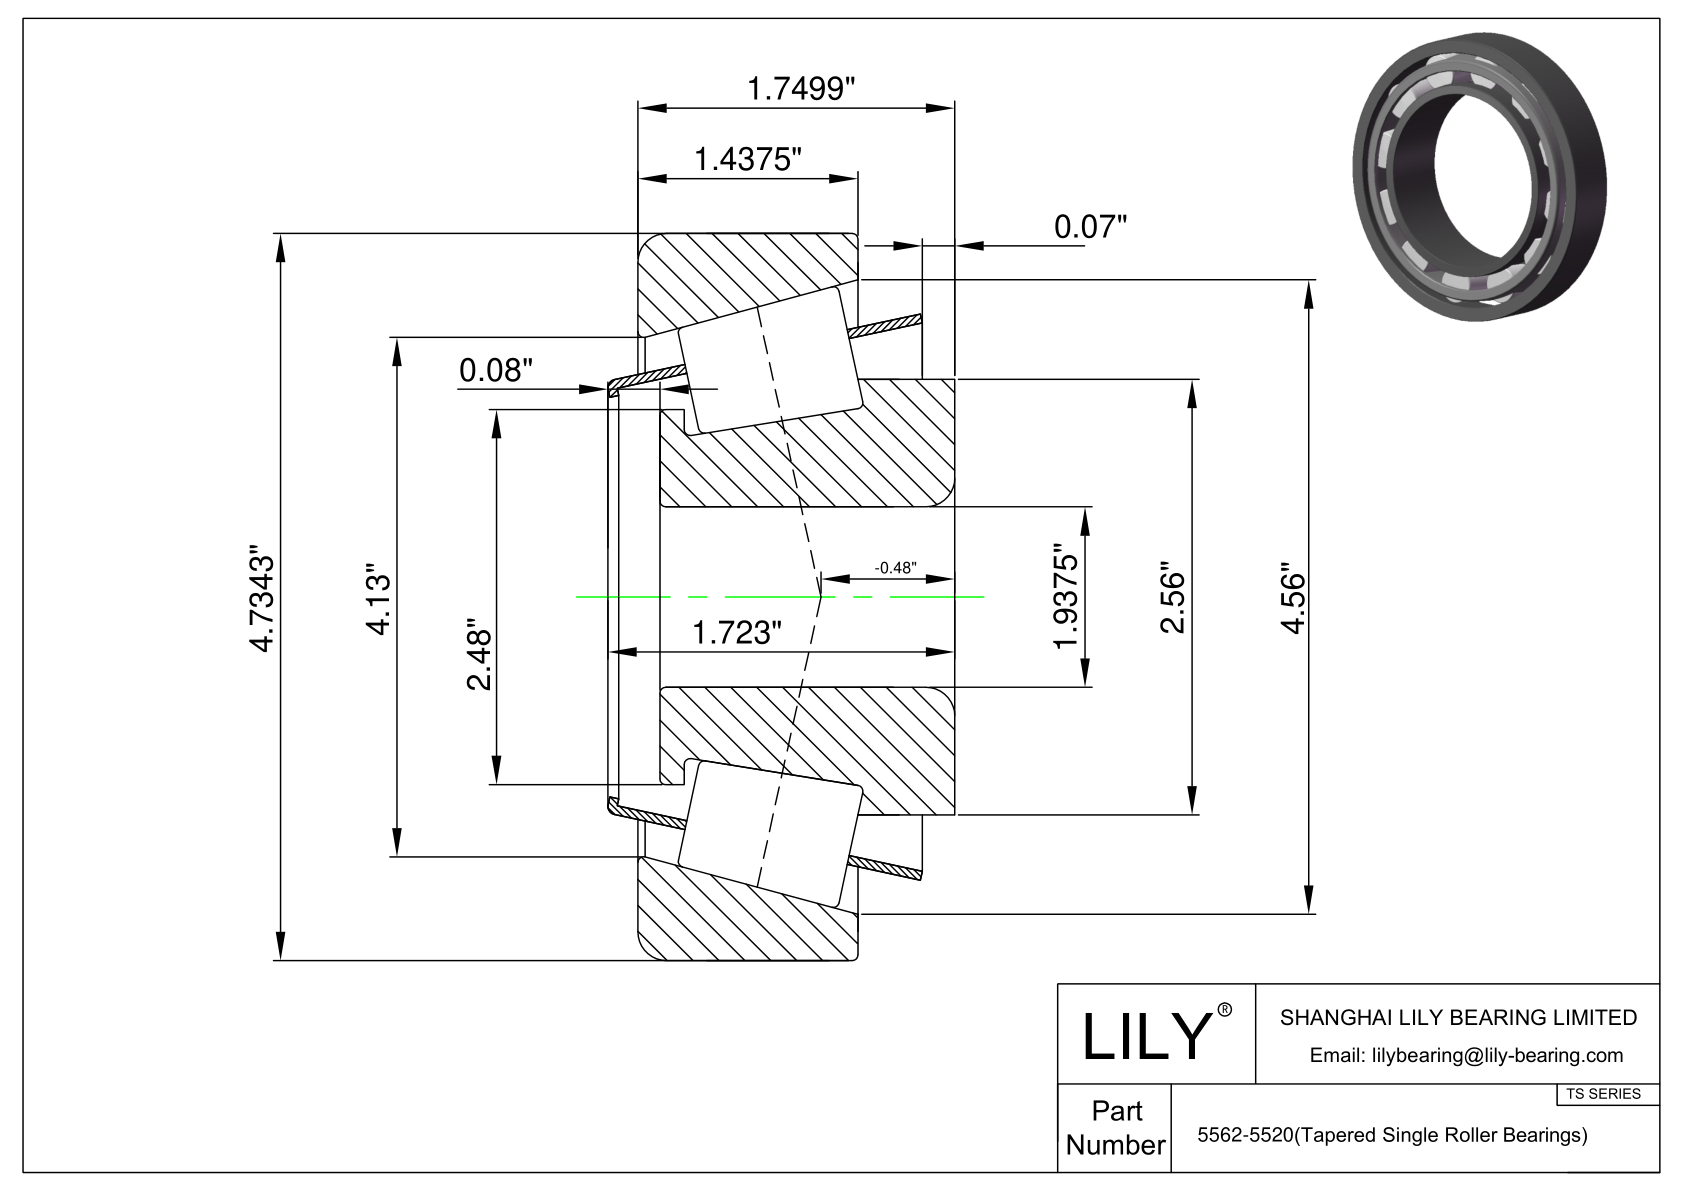 5562-5520 TS (Tapered Single Roller Bearings) (Imperial) cad drawing